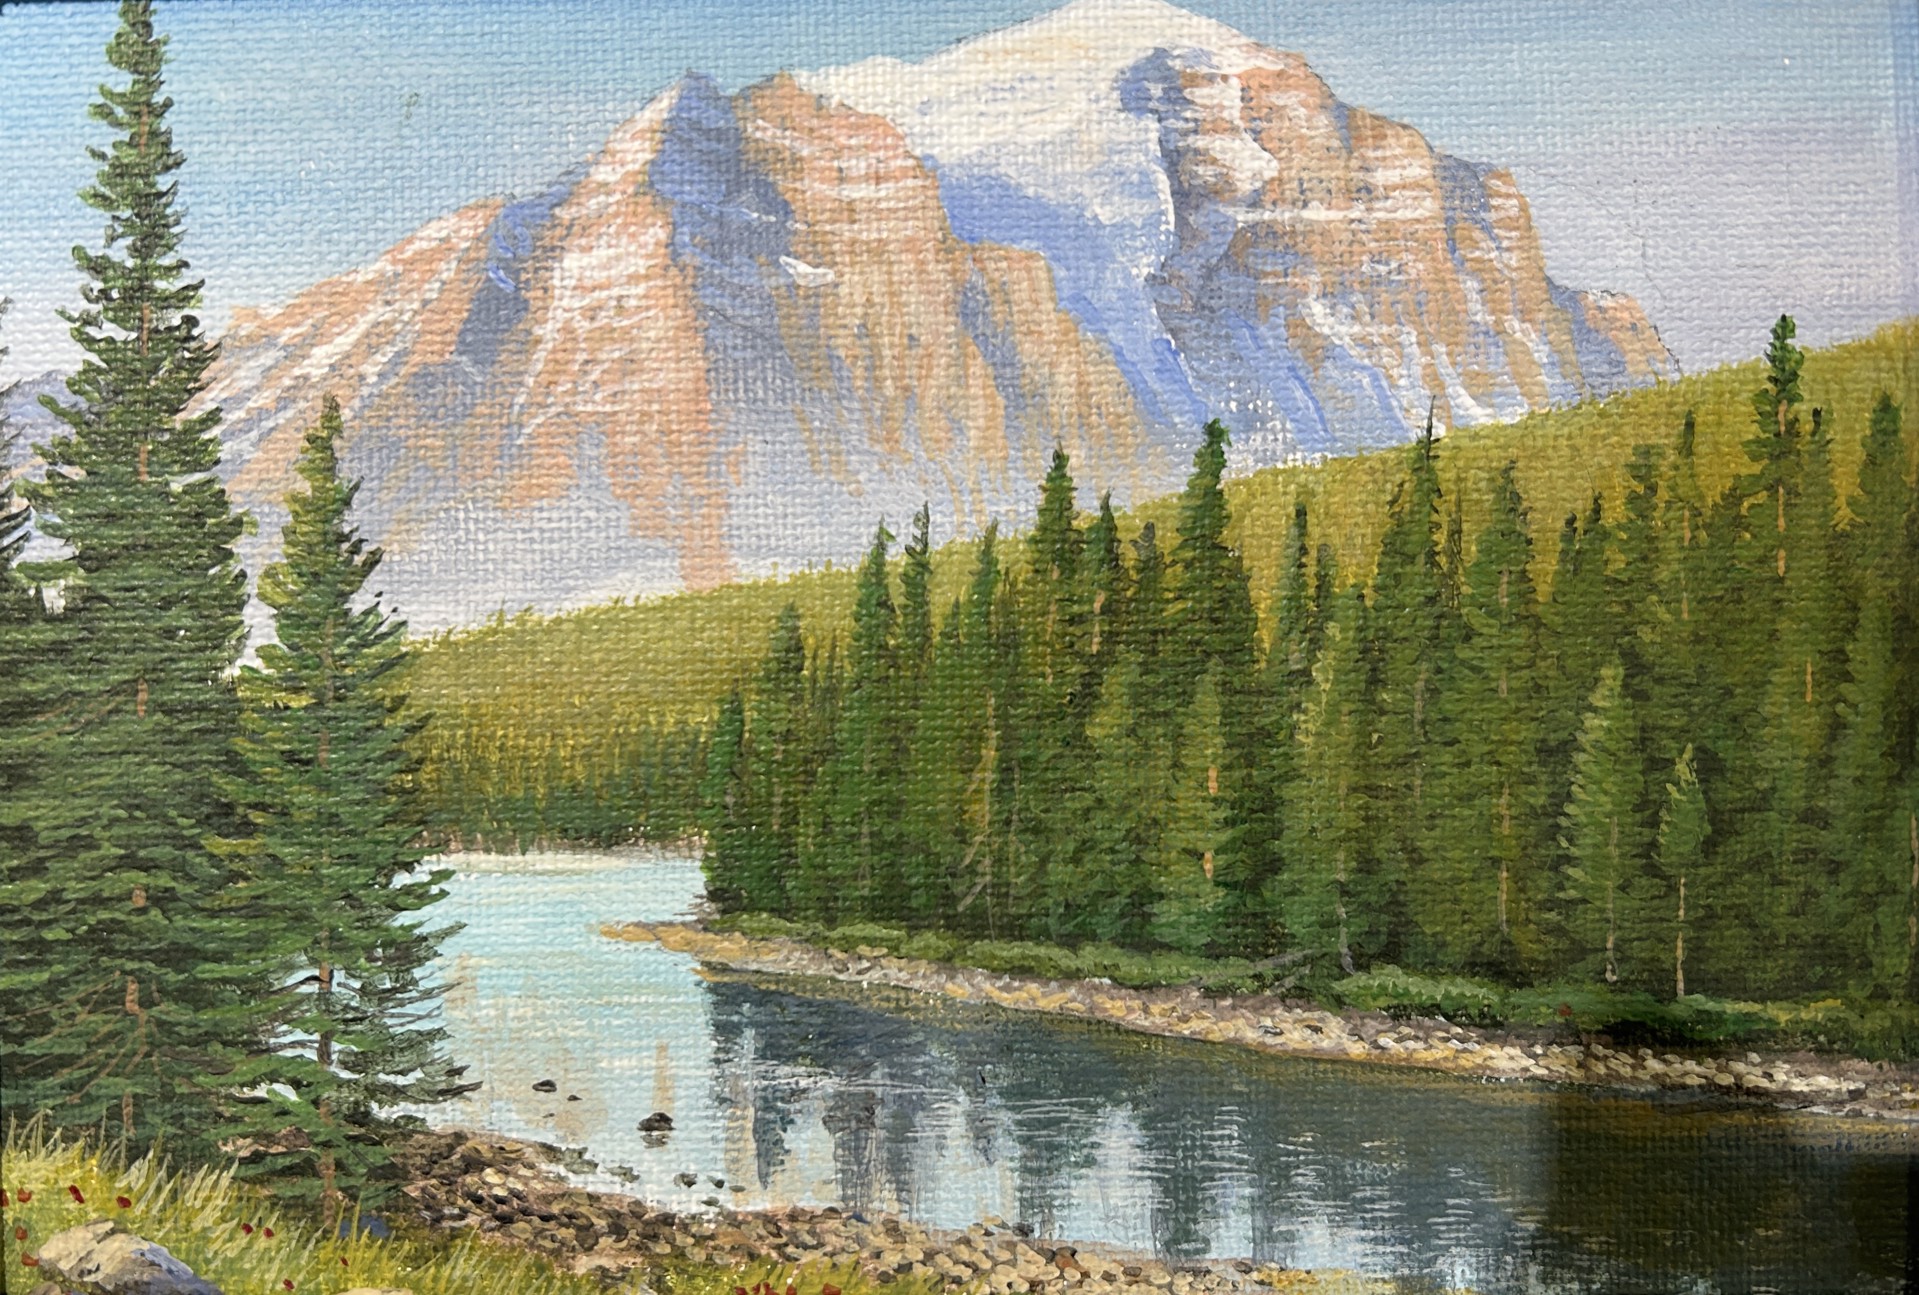 Down at The River (Mt. Temple from Lake Louise village) by Jake Vandenbrink